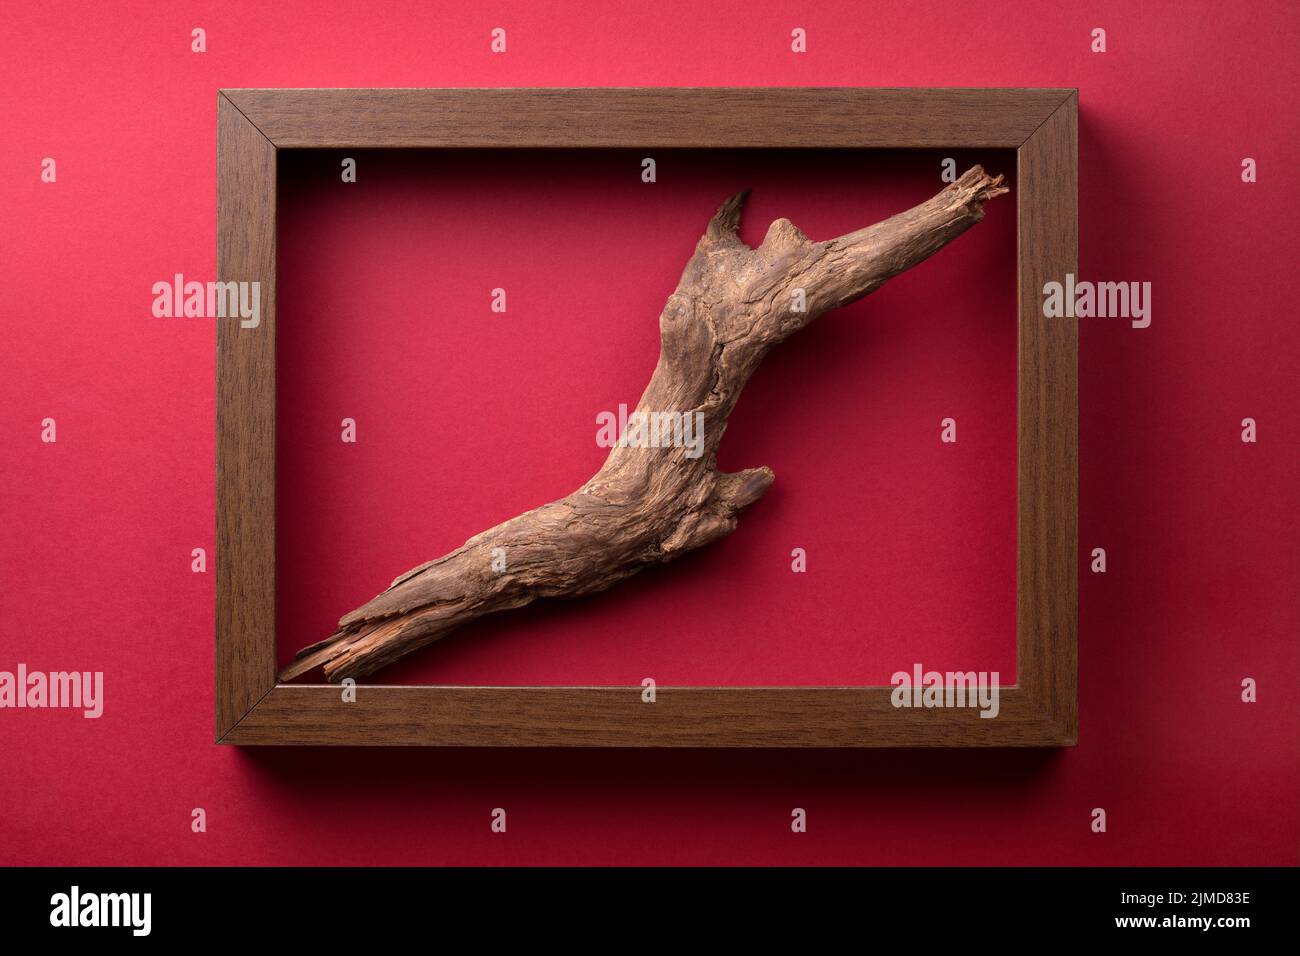 Minimal Composition With Wooden Frame Stock Photo